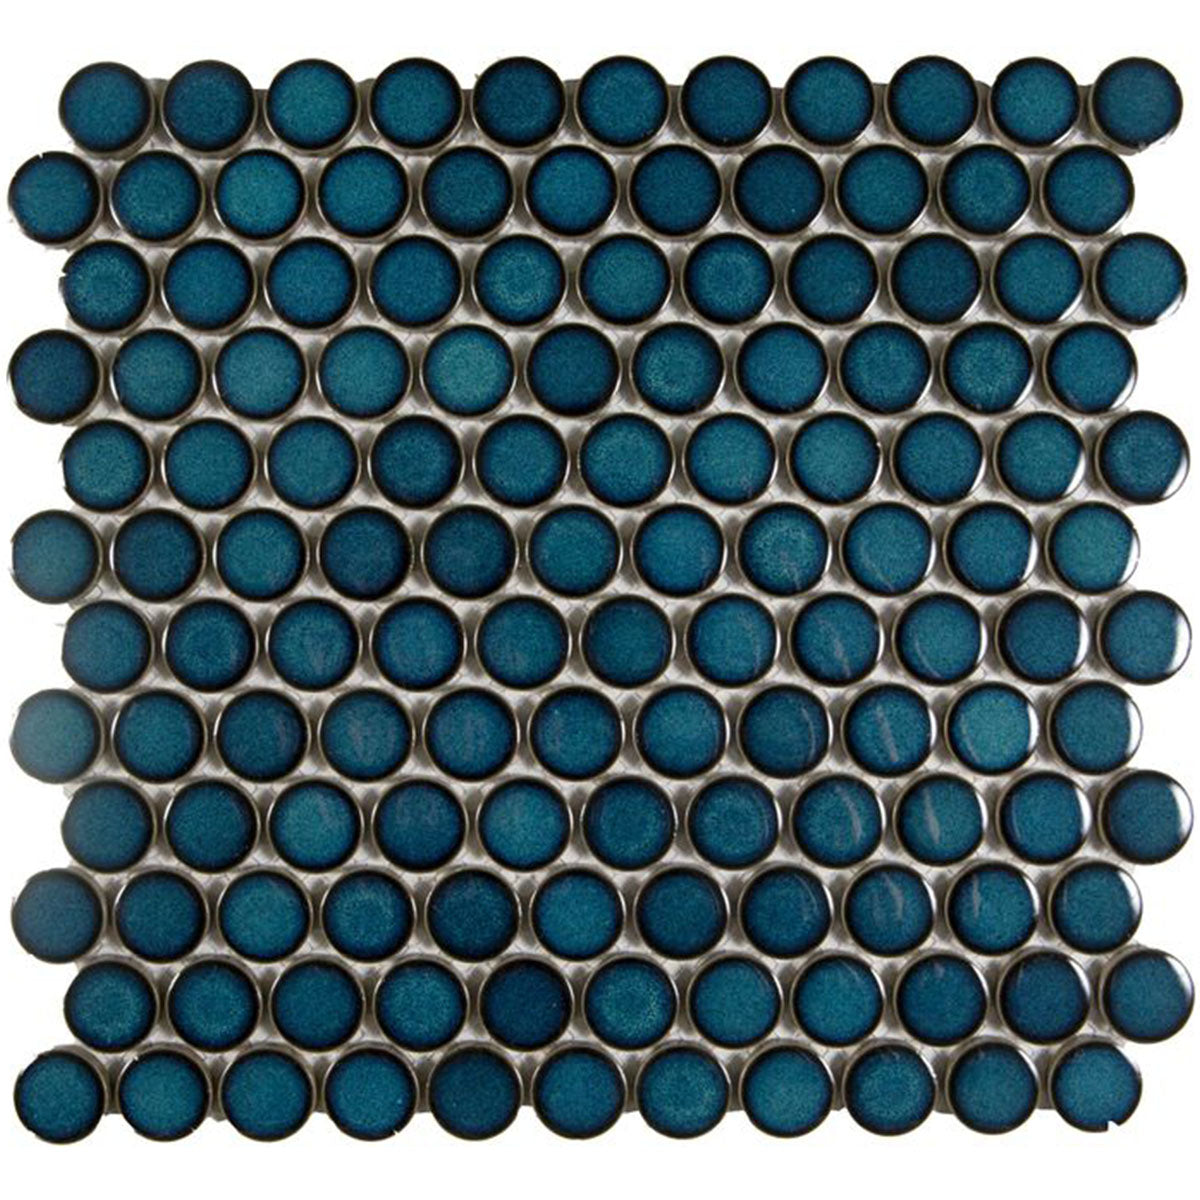 Penny Verde Round Wall Mosaic Tile 31x33cm Gloss